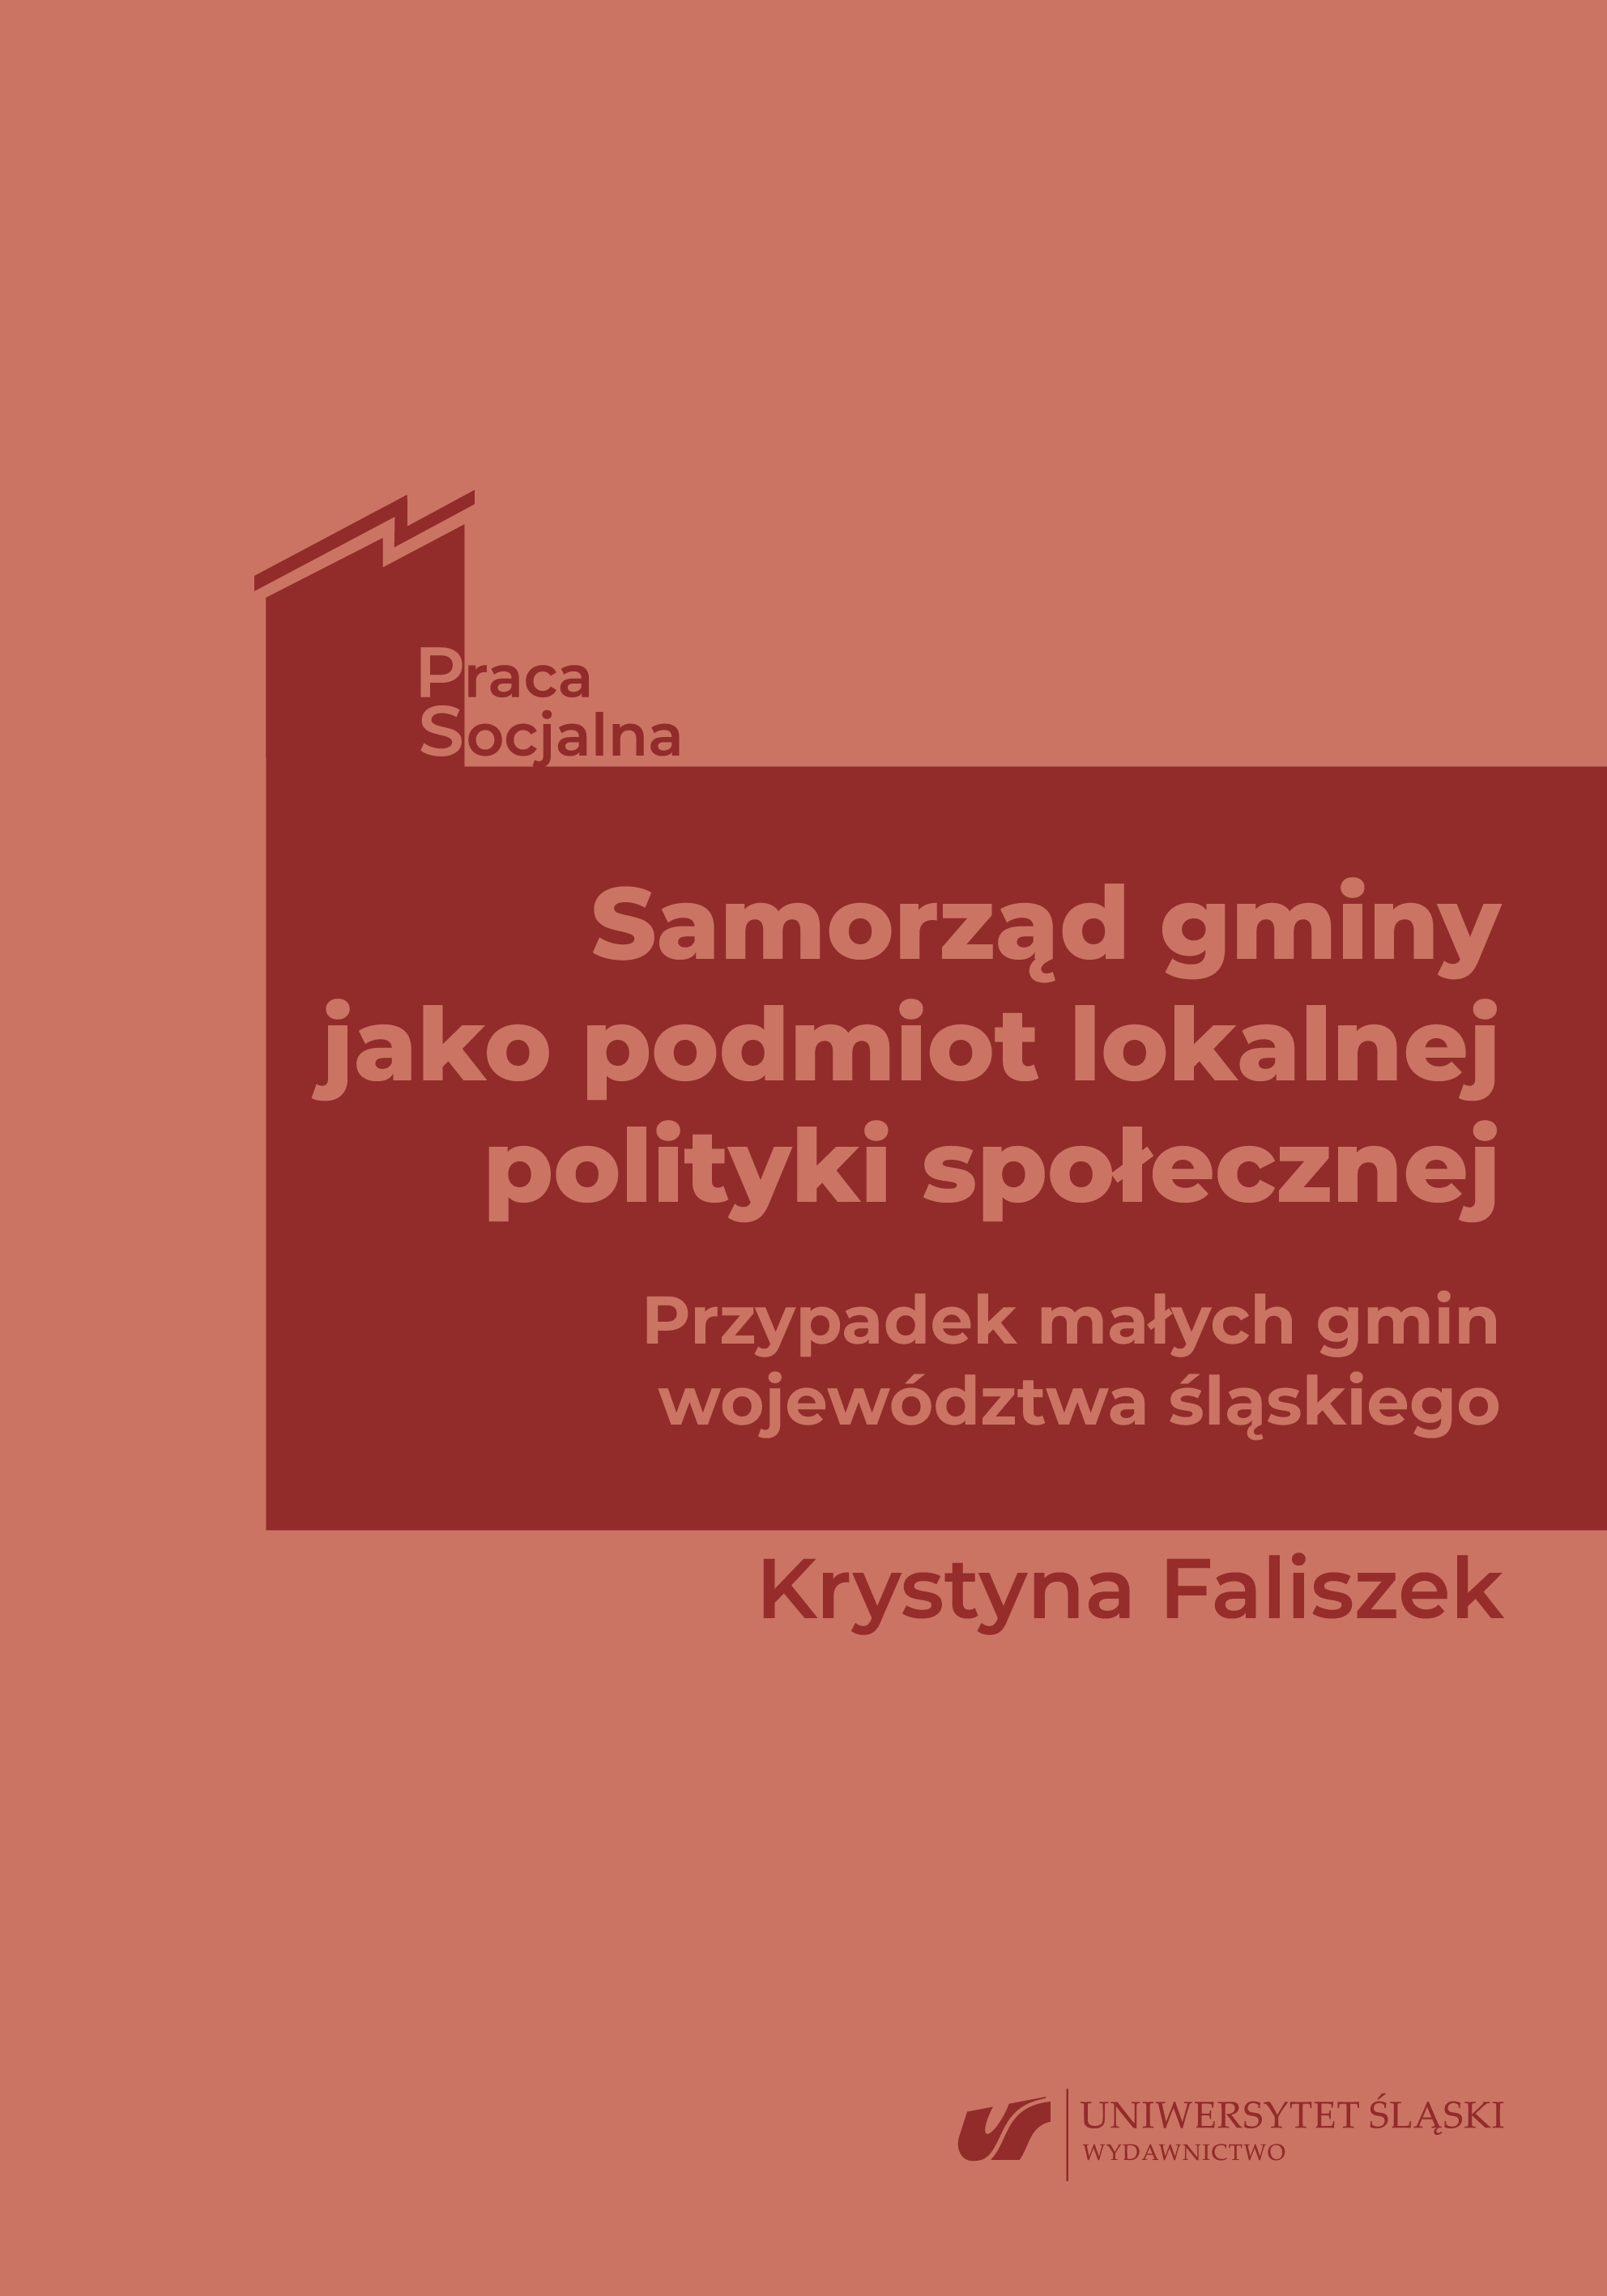 Communal self-government as a subject of local social policy. The case of small communes in the Silesian voivodship